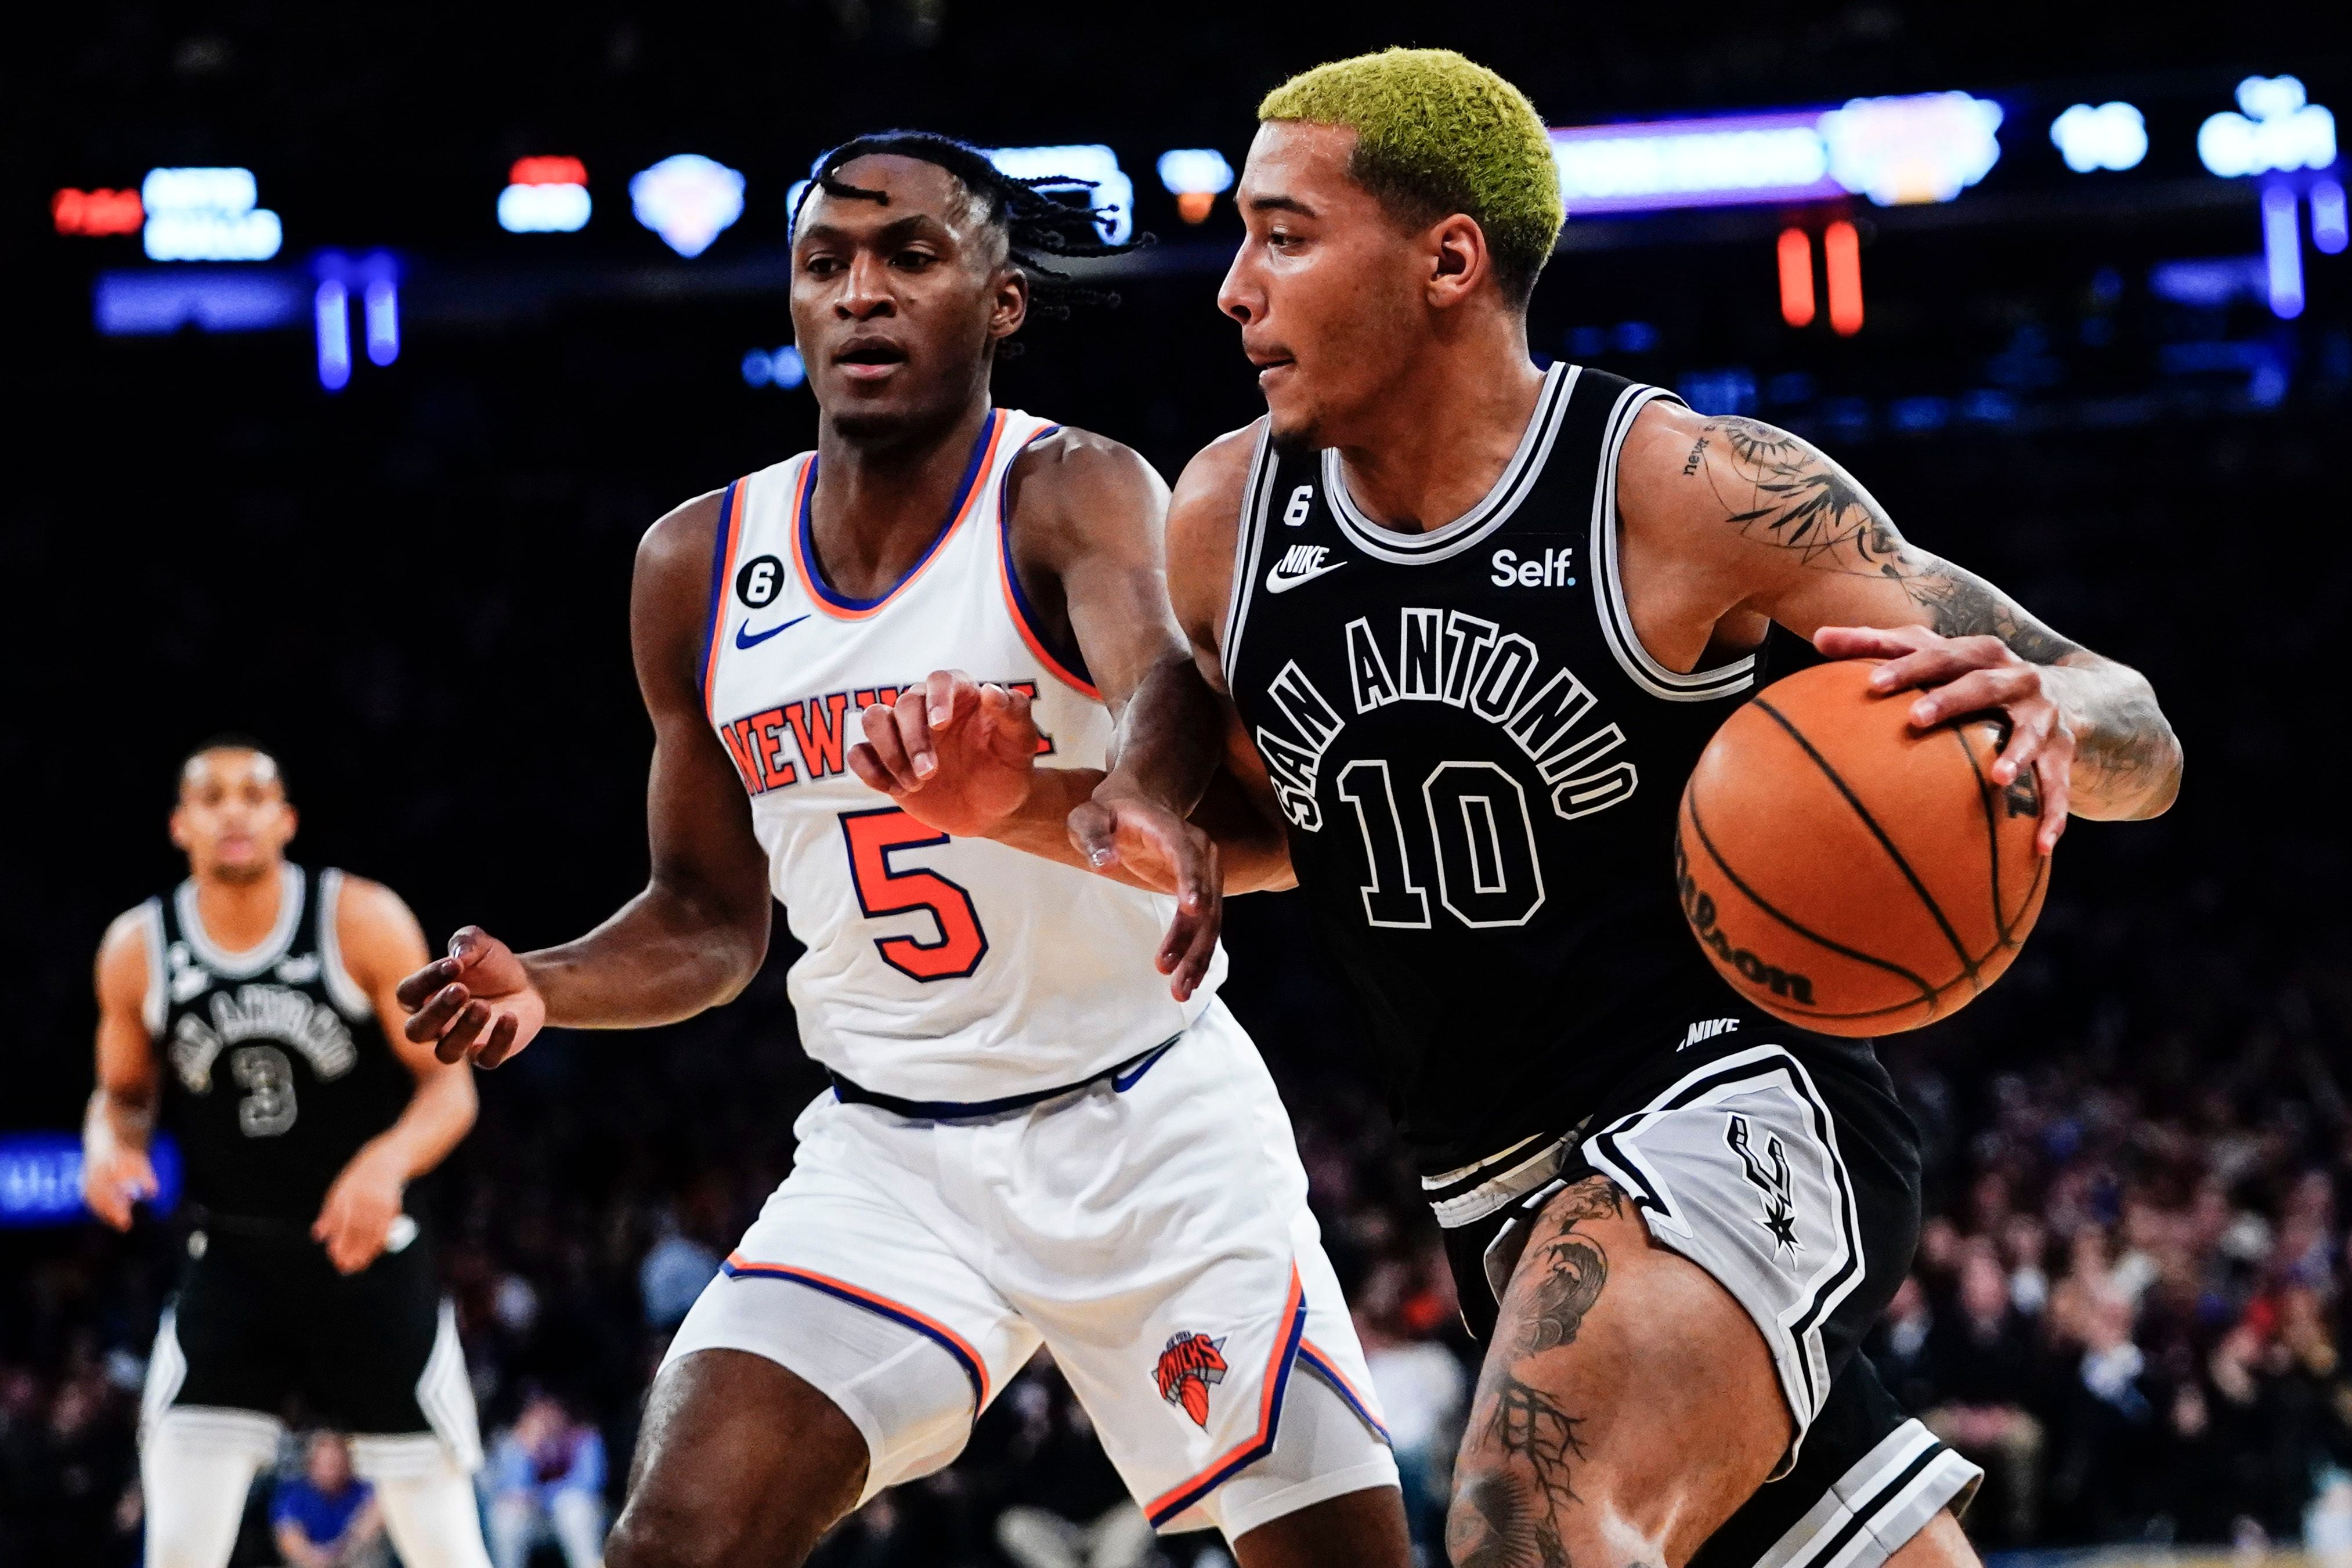 San Antonio Spurs' Jeremy Sochan (10) drives past New York Knicks' Immanuel Quickley (5) during the first half of an NBA basketball game Wednesday, Jan. 4, 2023, in New York. (AP Photo/Frank Franklin II)